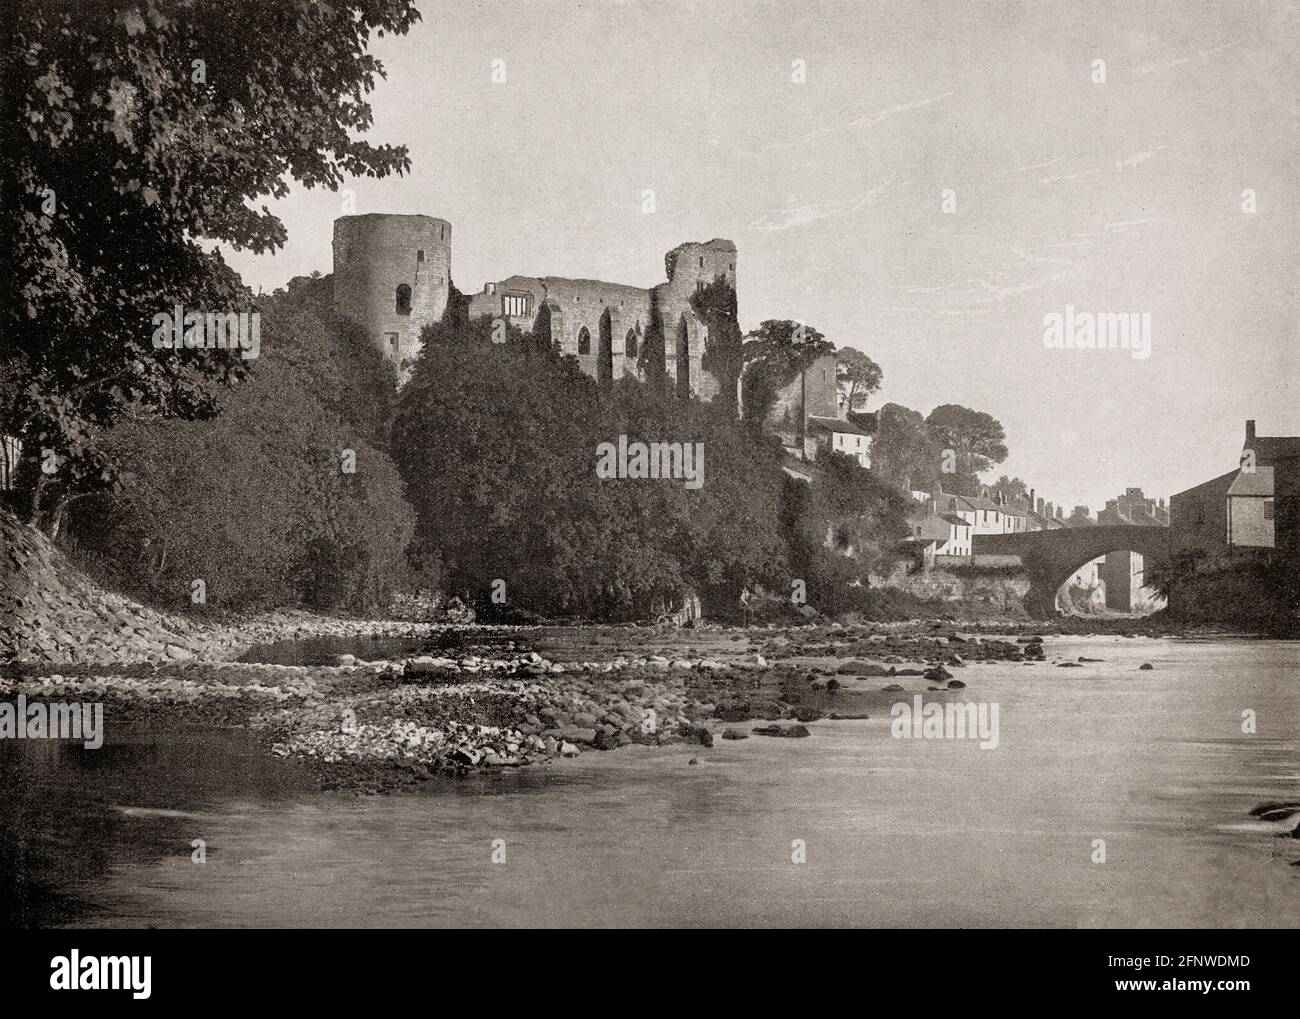 A late 19th Century view of Barnard Castle, a market town in Teesdale, County Durham, England. It is named after the castle around which it was built and sits on the River Tees. The castle was  built in stone by Bernard de Balliol I during the latter half of the 12th century, giving rise to the town's name. The castle passed down through the Balliol family, then into the possession of Richard Neville, Earl of Warwick. King Richard III inherited it through his wife, Anne Neville, but it fell into ruins in the 15th century after his death. Stock Photo